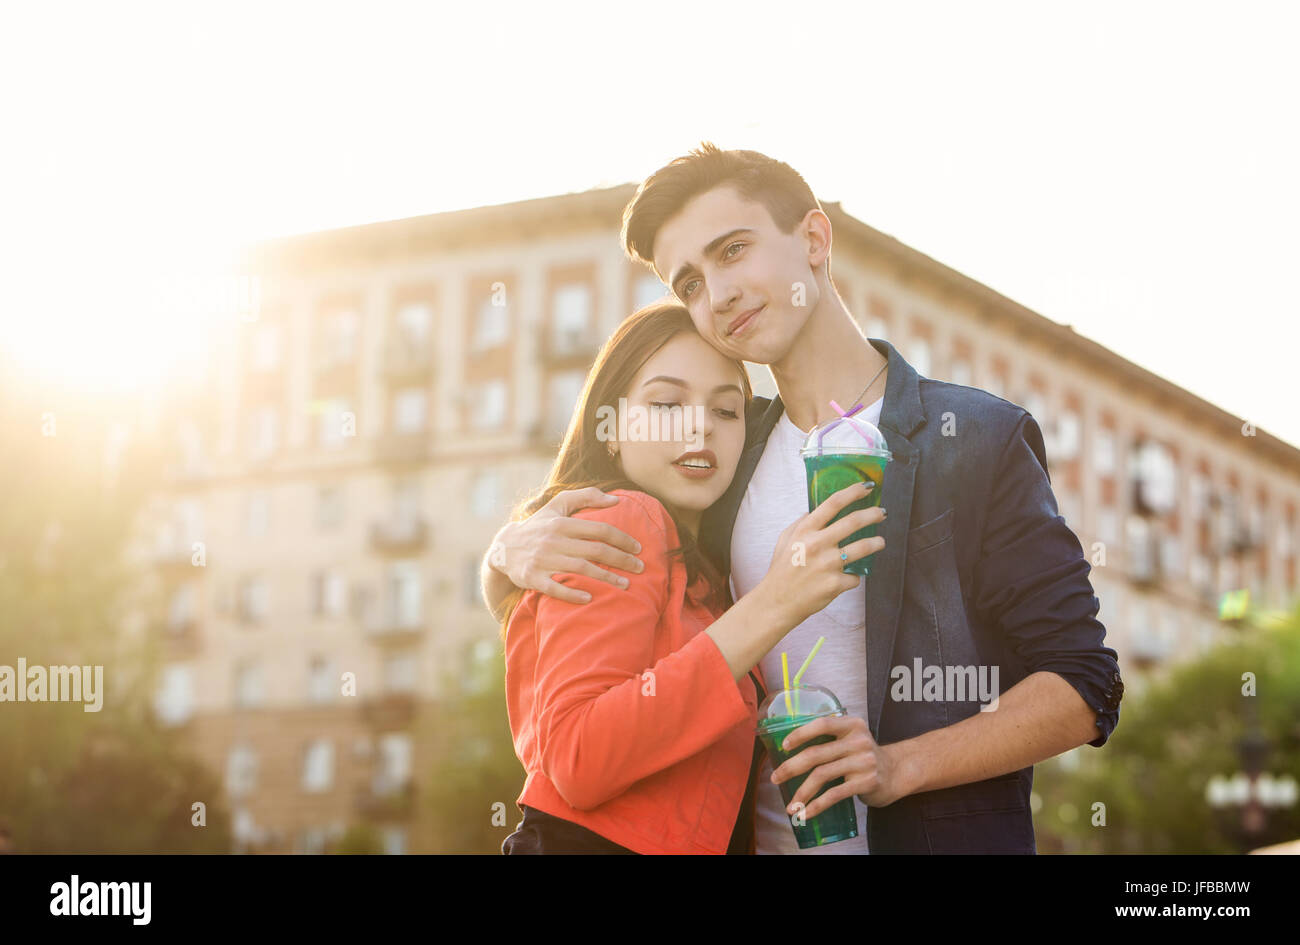 Teenagers drink fruit fresh from glasses. They embrace. A couple in love on a date. Romance of first love. Stock Photo